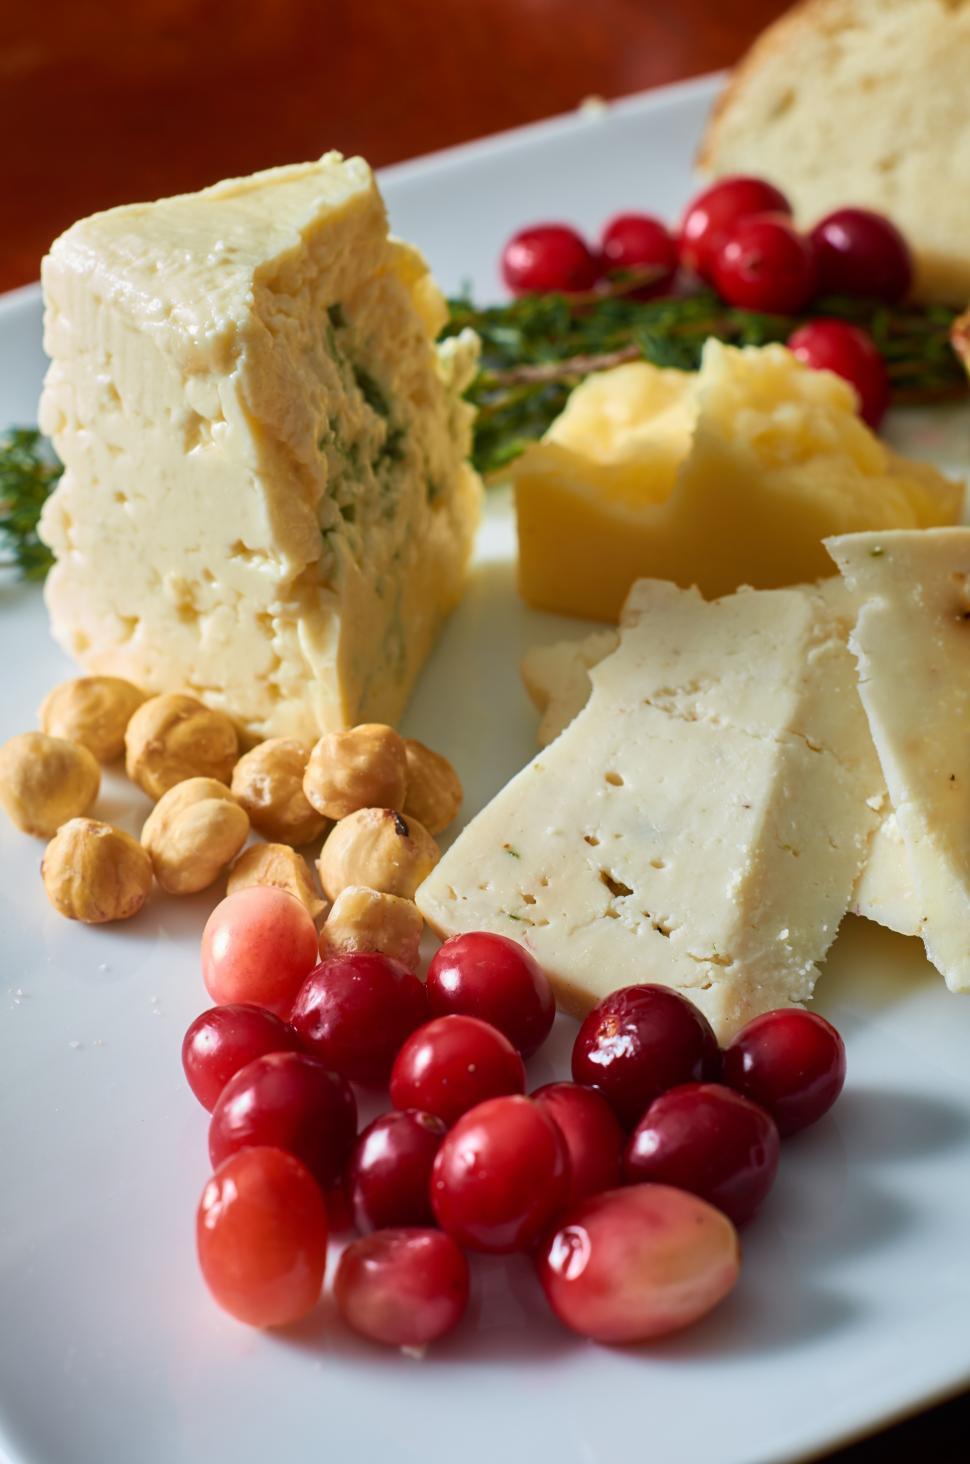 Free Image of A plate of food with cheese and nuts 